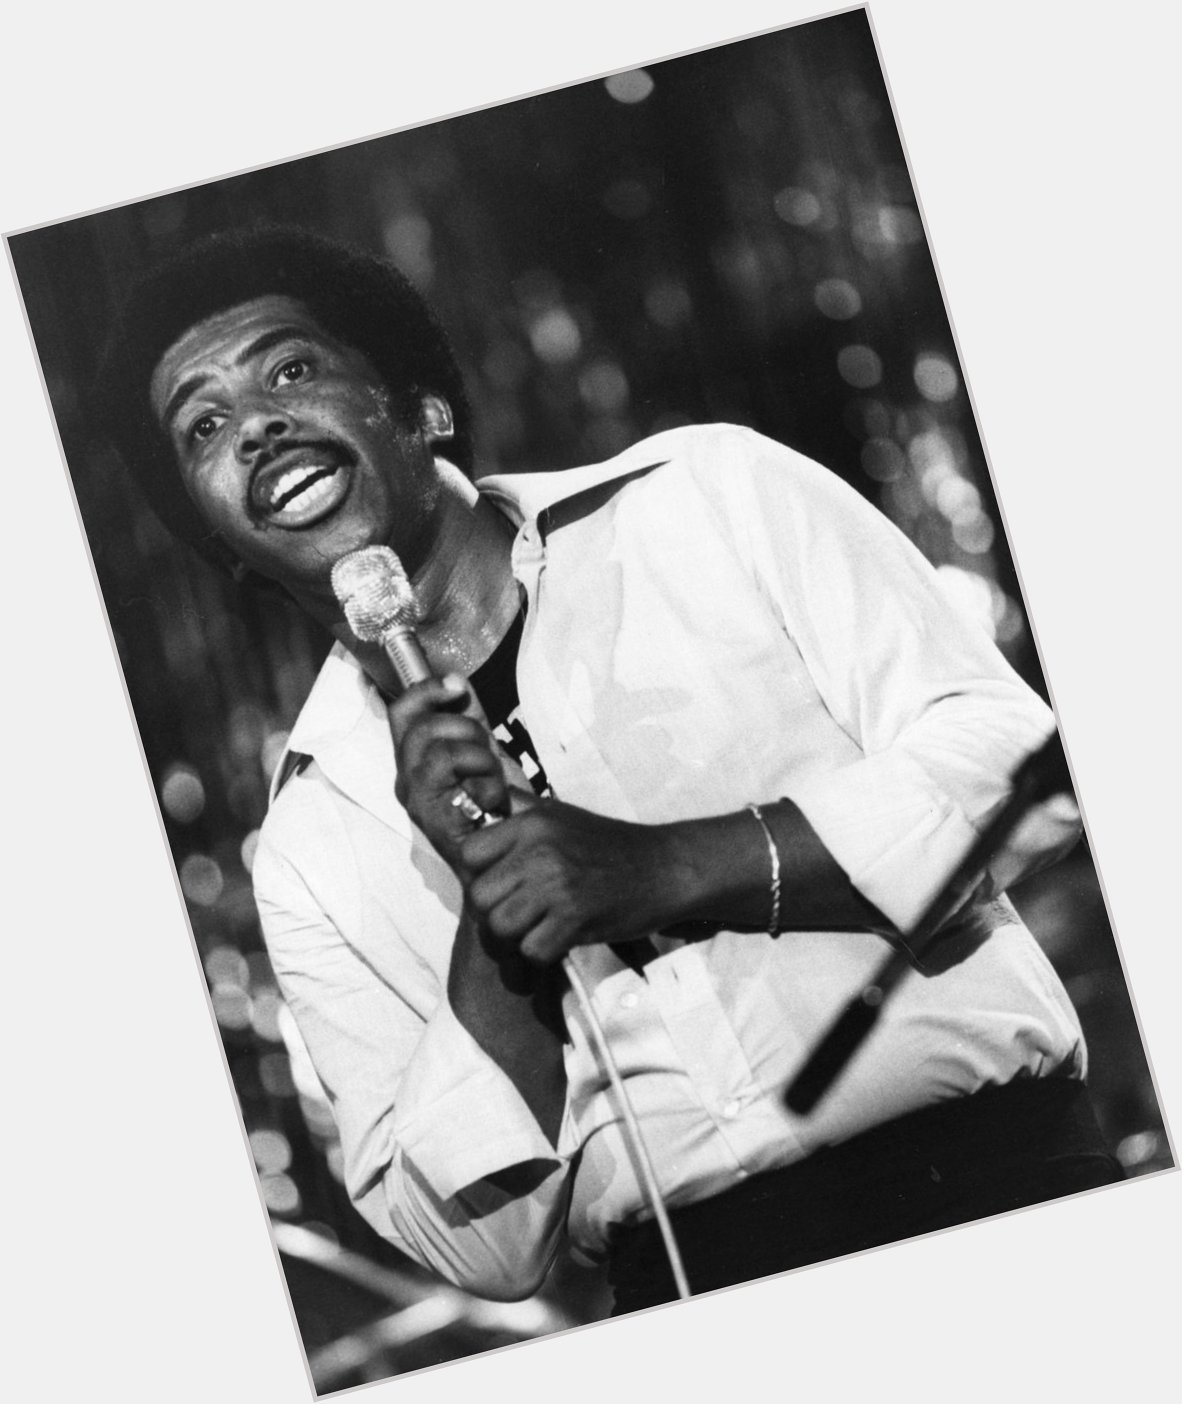 Happy Birthday to Ben E. King, who would have turned 77 today! 